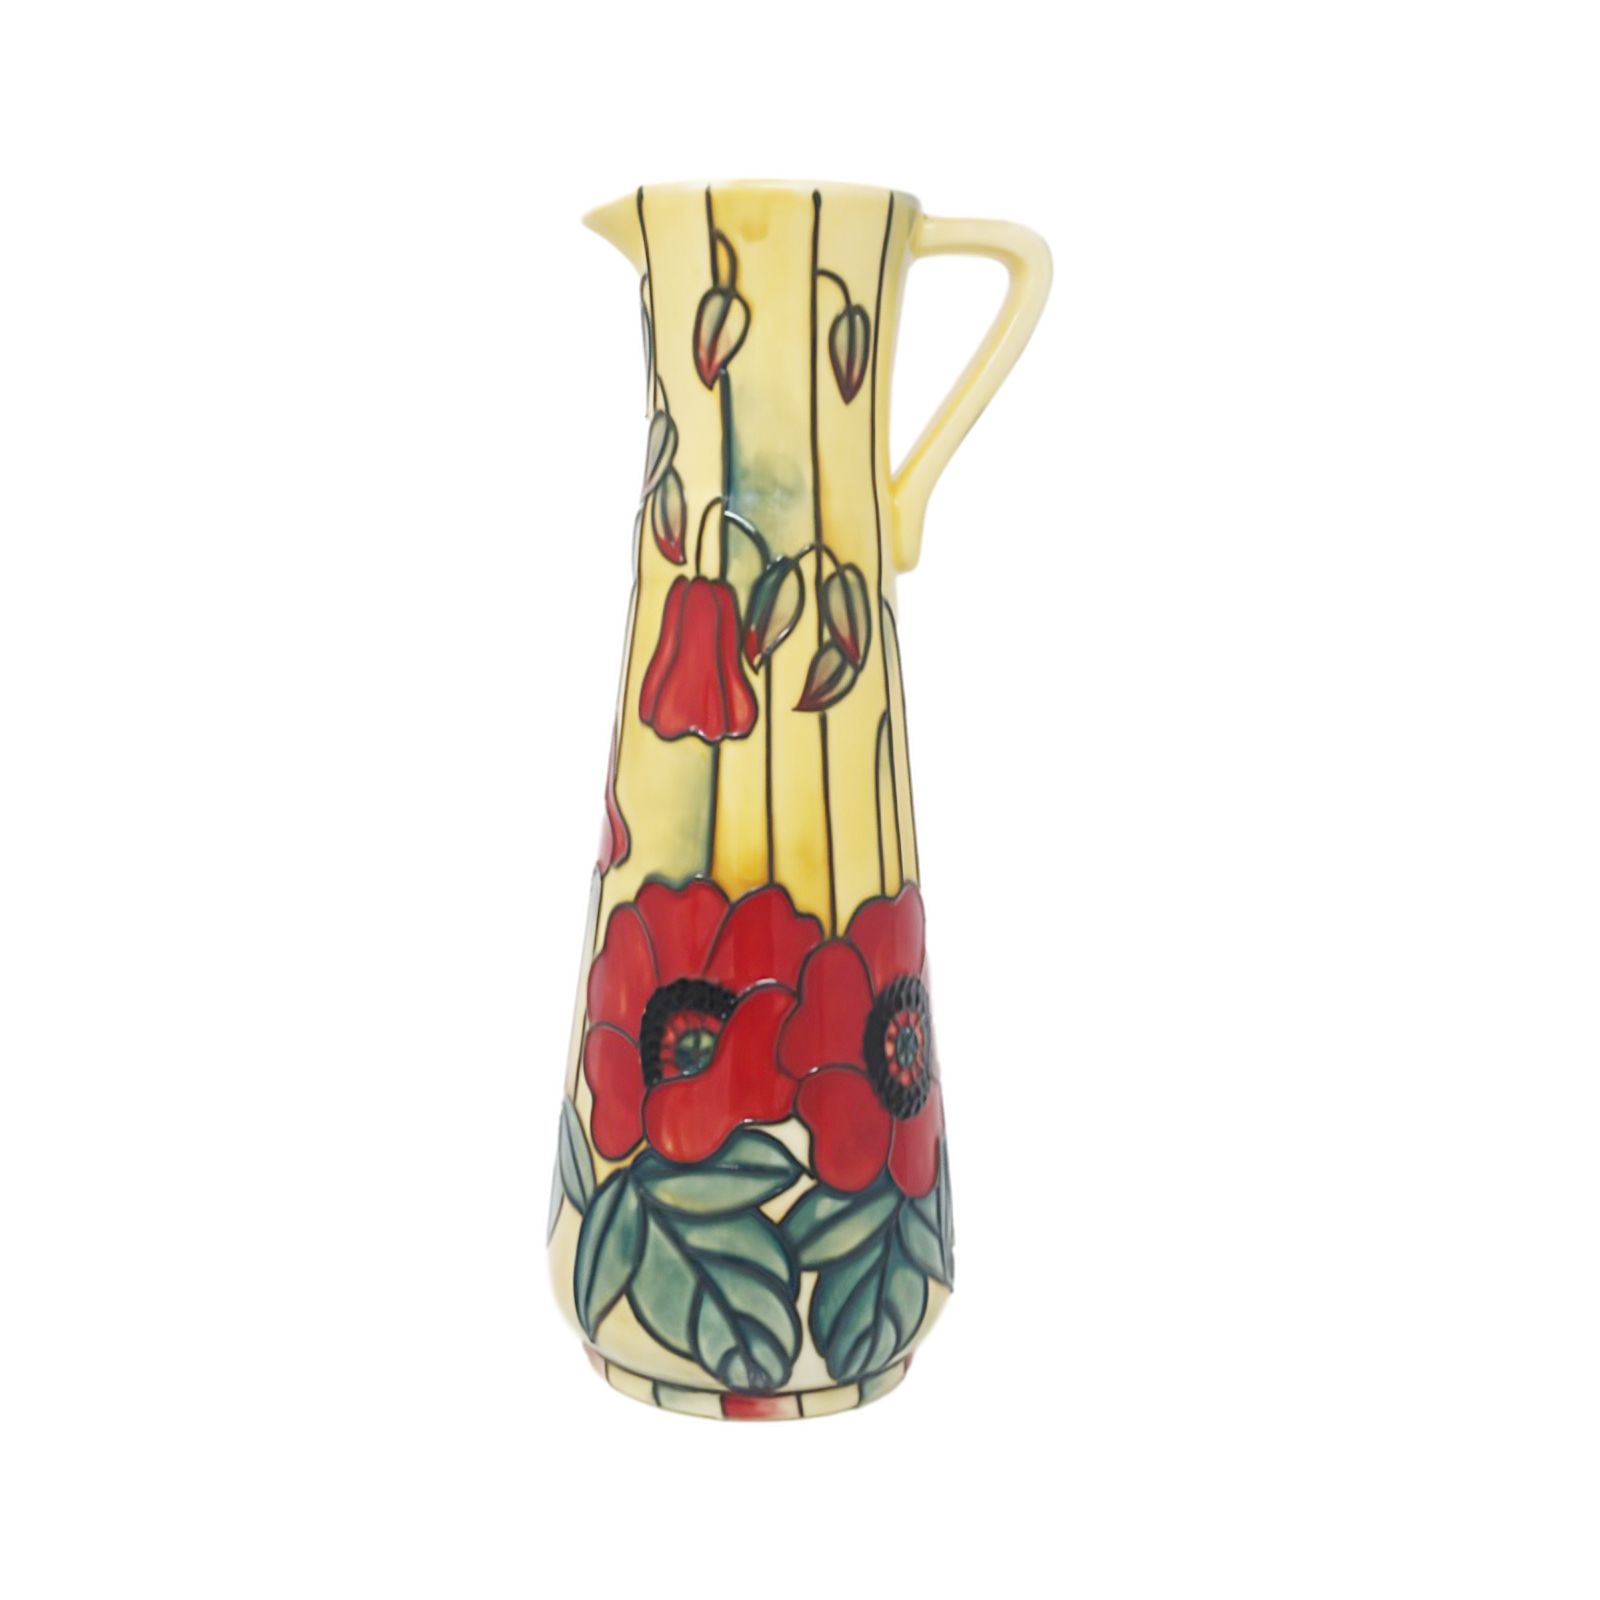 pretty vase or pitcher with spout and handle and red poppy decor elegant gift